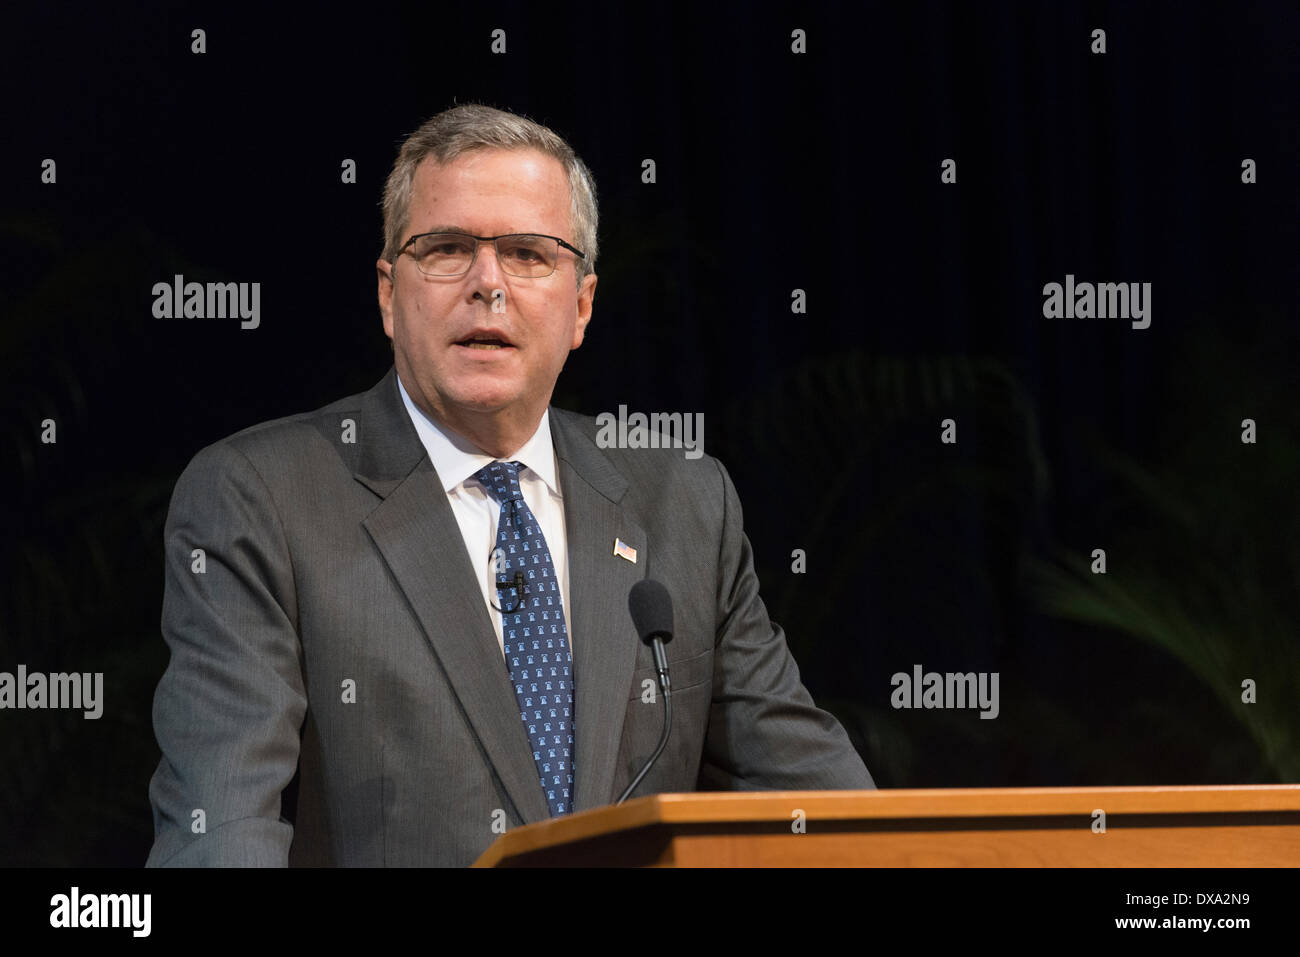 Former governor Jeb Bush was Governor of Florida 1999-2007, Bush ran for USA presidential race 2016. Brother of George W. & son of George H.W. Bush (US Presidents) Jeb Bush is political blue blood. He co-authored book on immigration, his wife is Mexican-born immigrant. Immigration reform is hot button issue for 2016 elections. Stock Photo